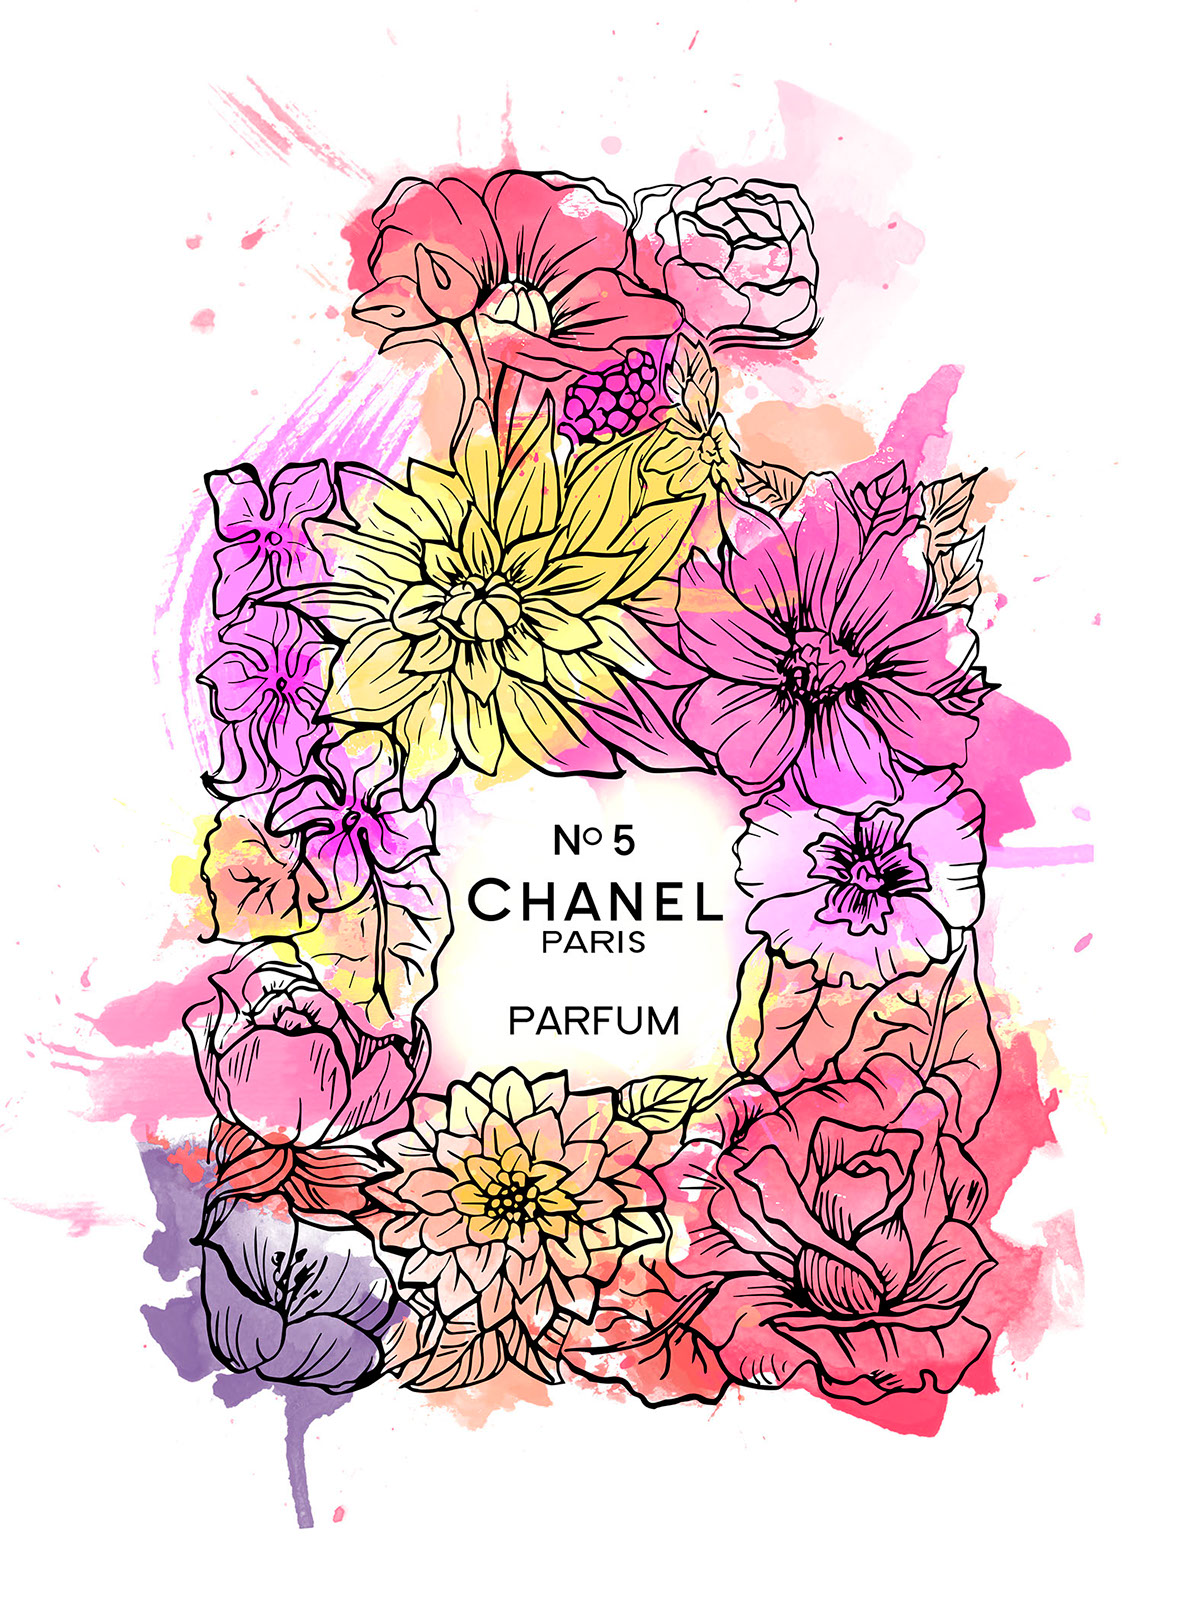 chanel poster illustration fashion illustration Promotional perfume advertisement Poster Design Botanicals watercolor Flowers florals floral pattern floral painting flower pattern digital painting